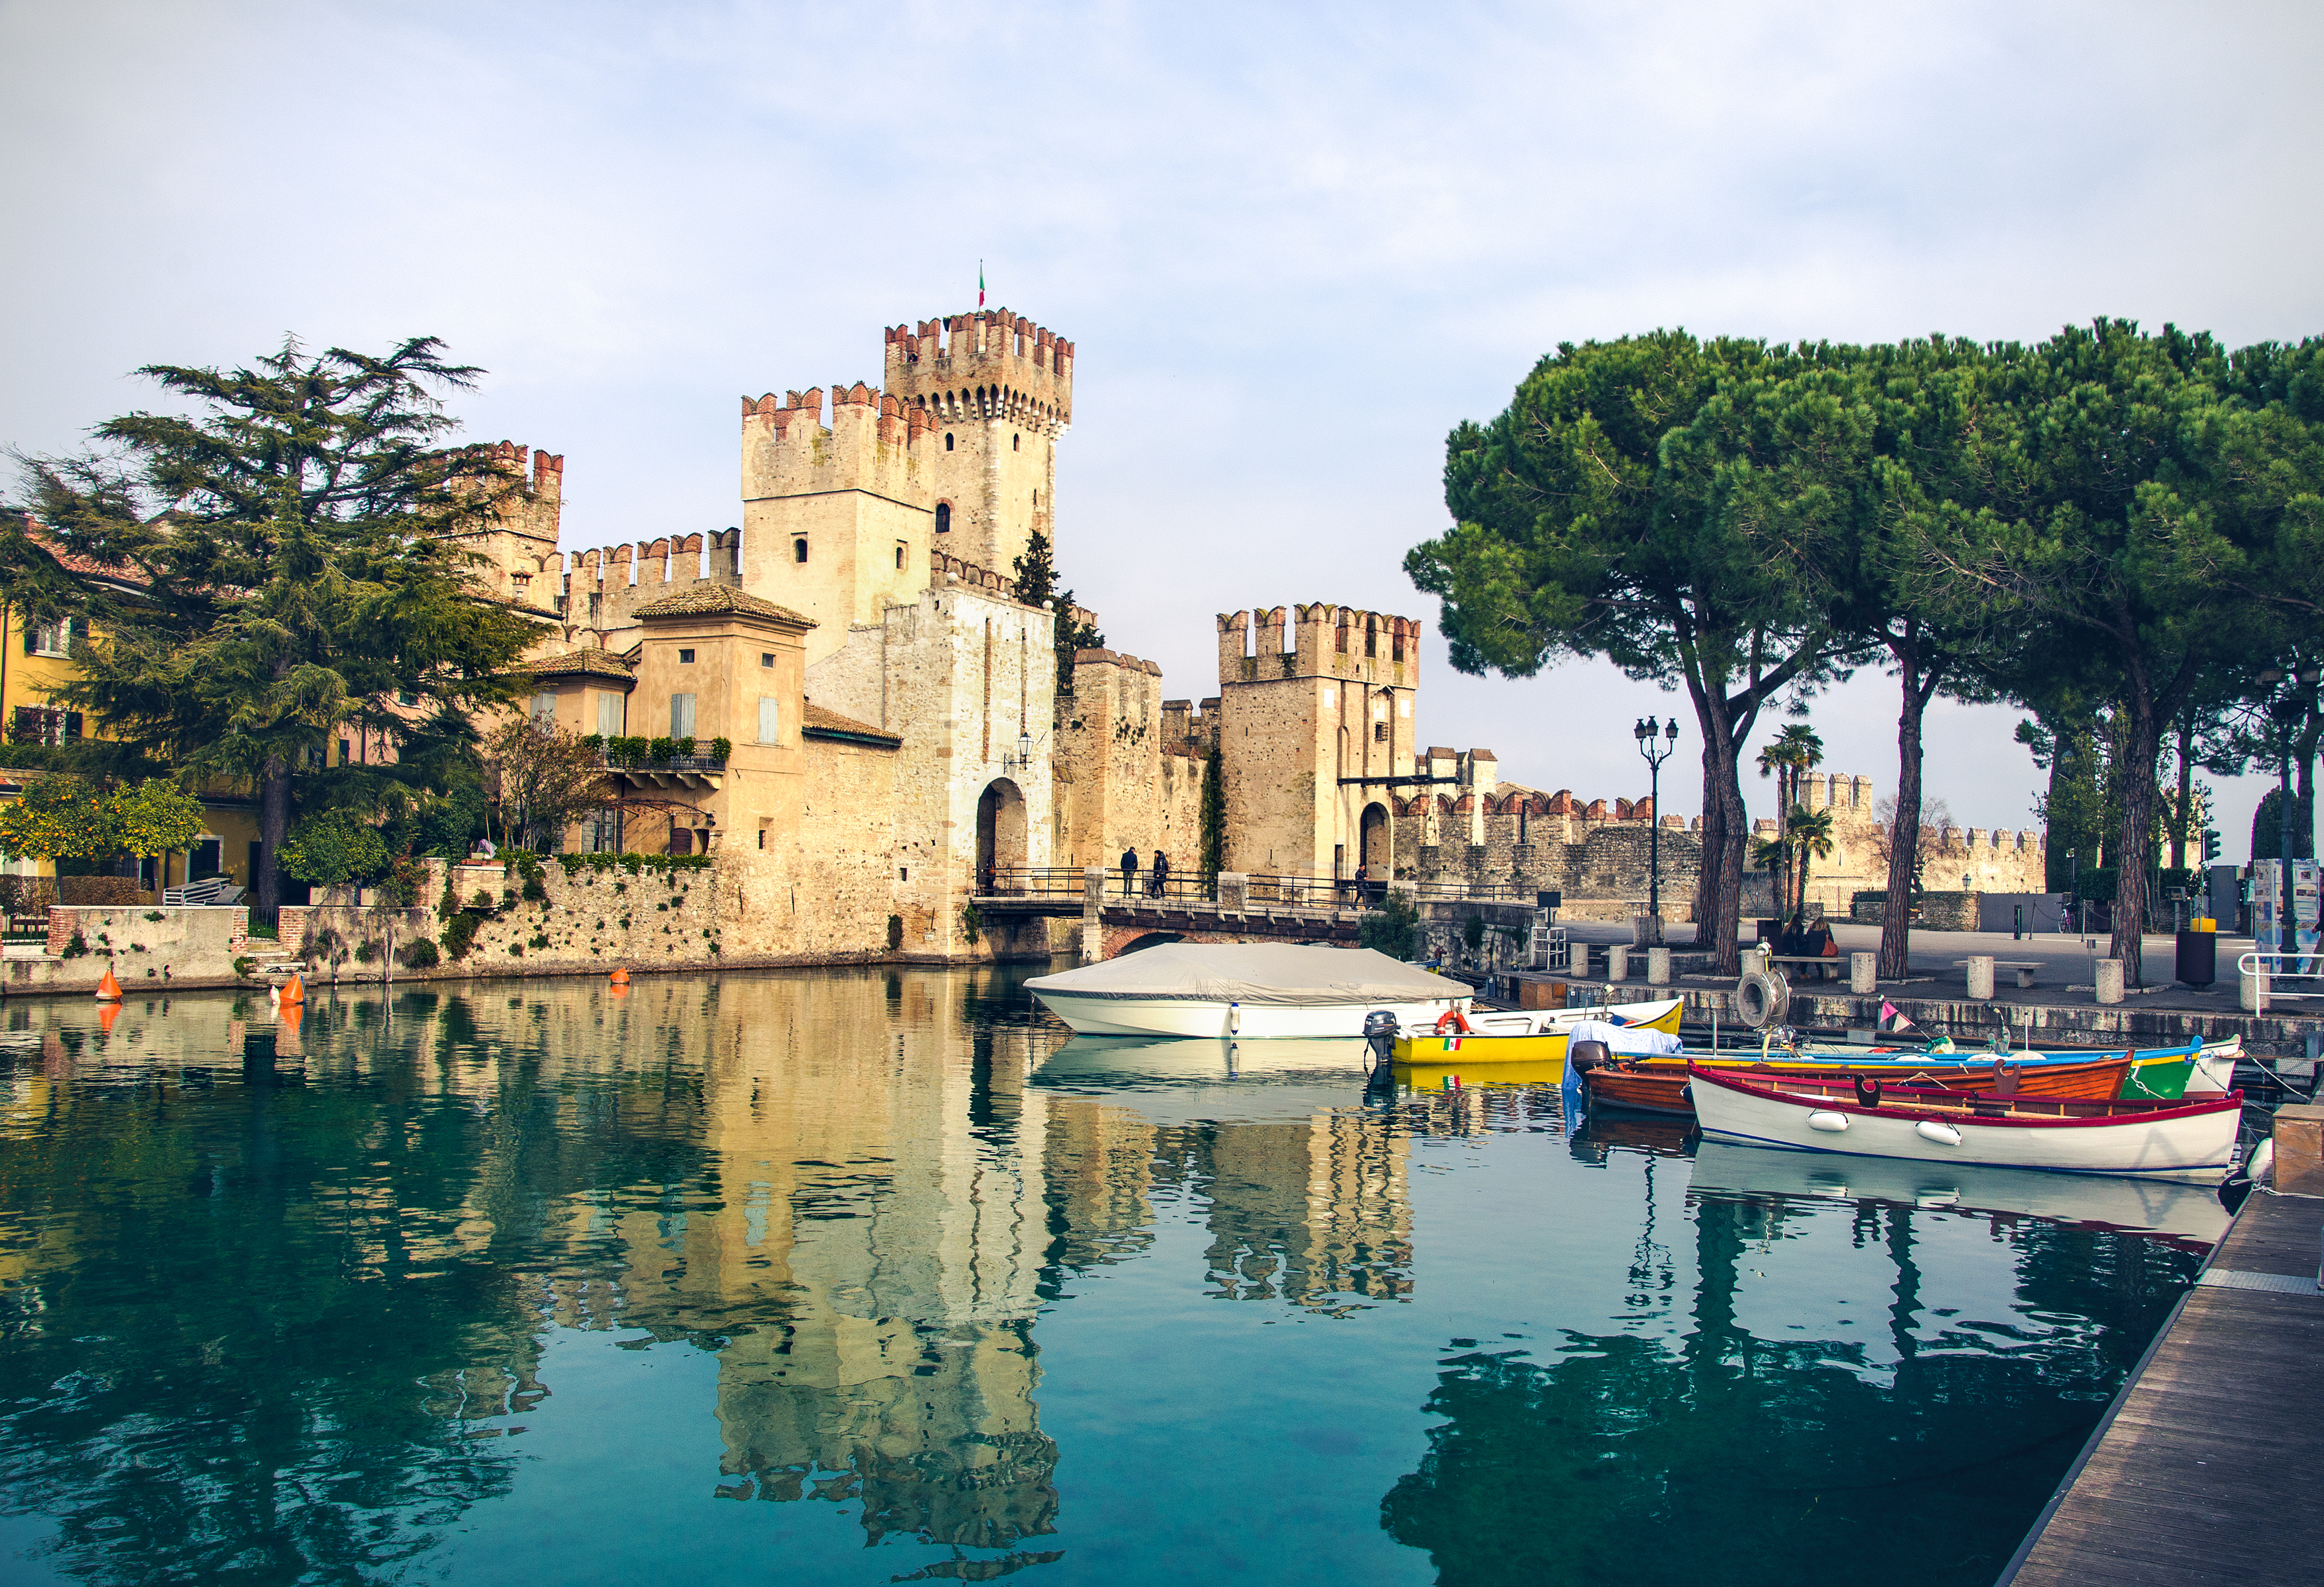 Tips and lessons learned while planning our road trip through Italy.